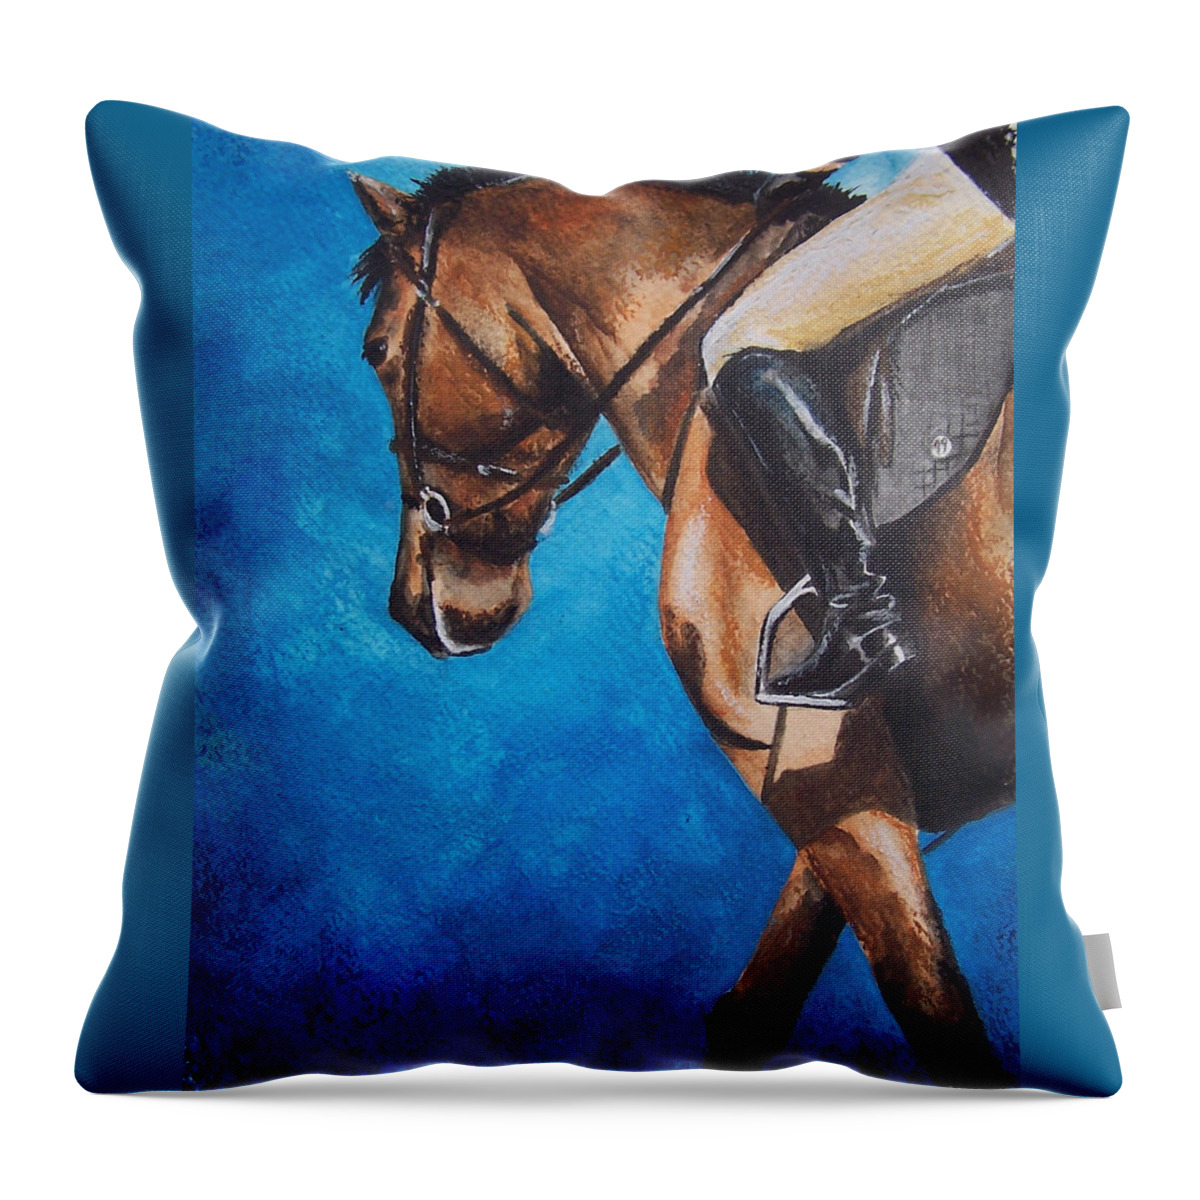 Dressage Throw Pillow featuring the painting The Warm Up by Kathy Laughlin